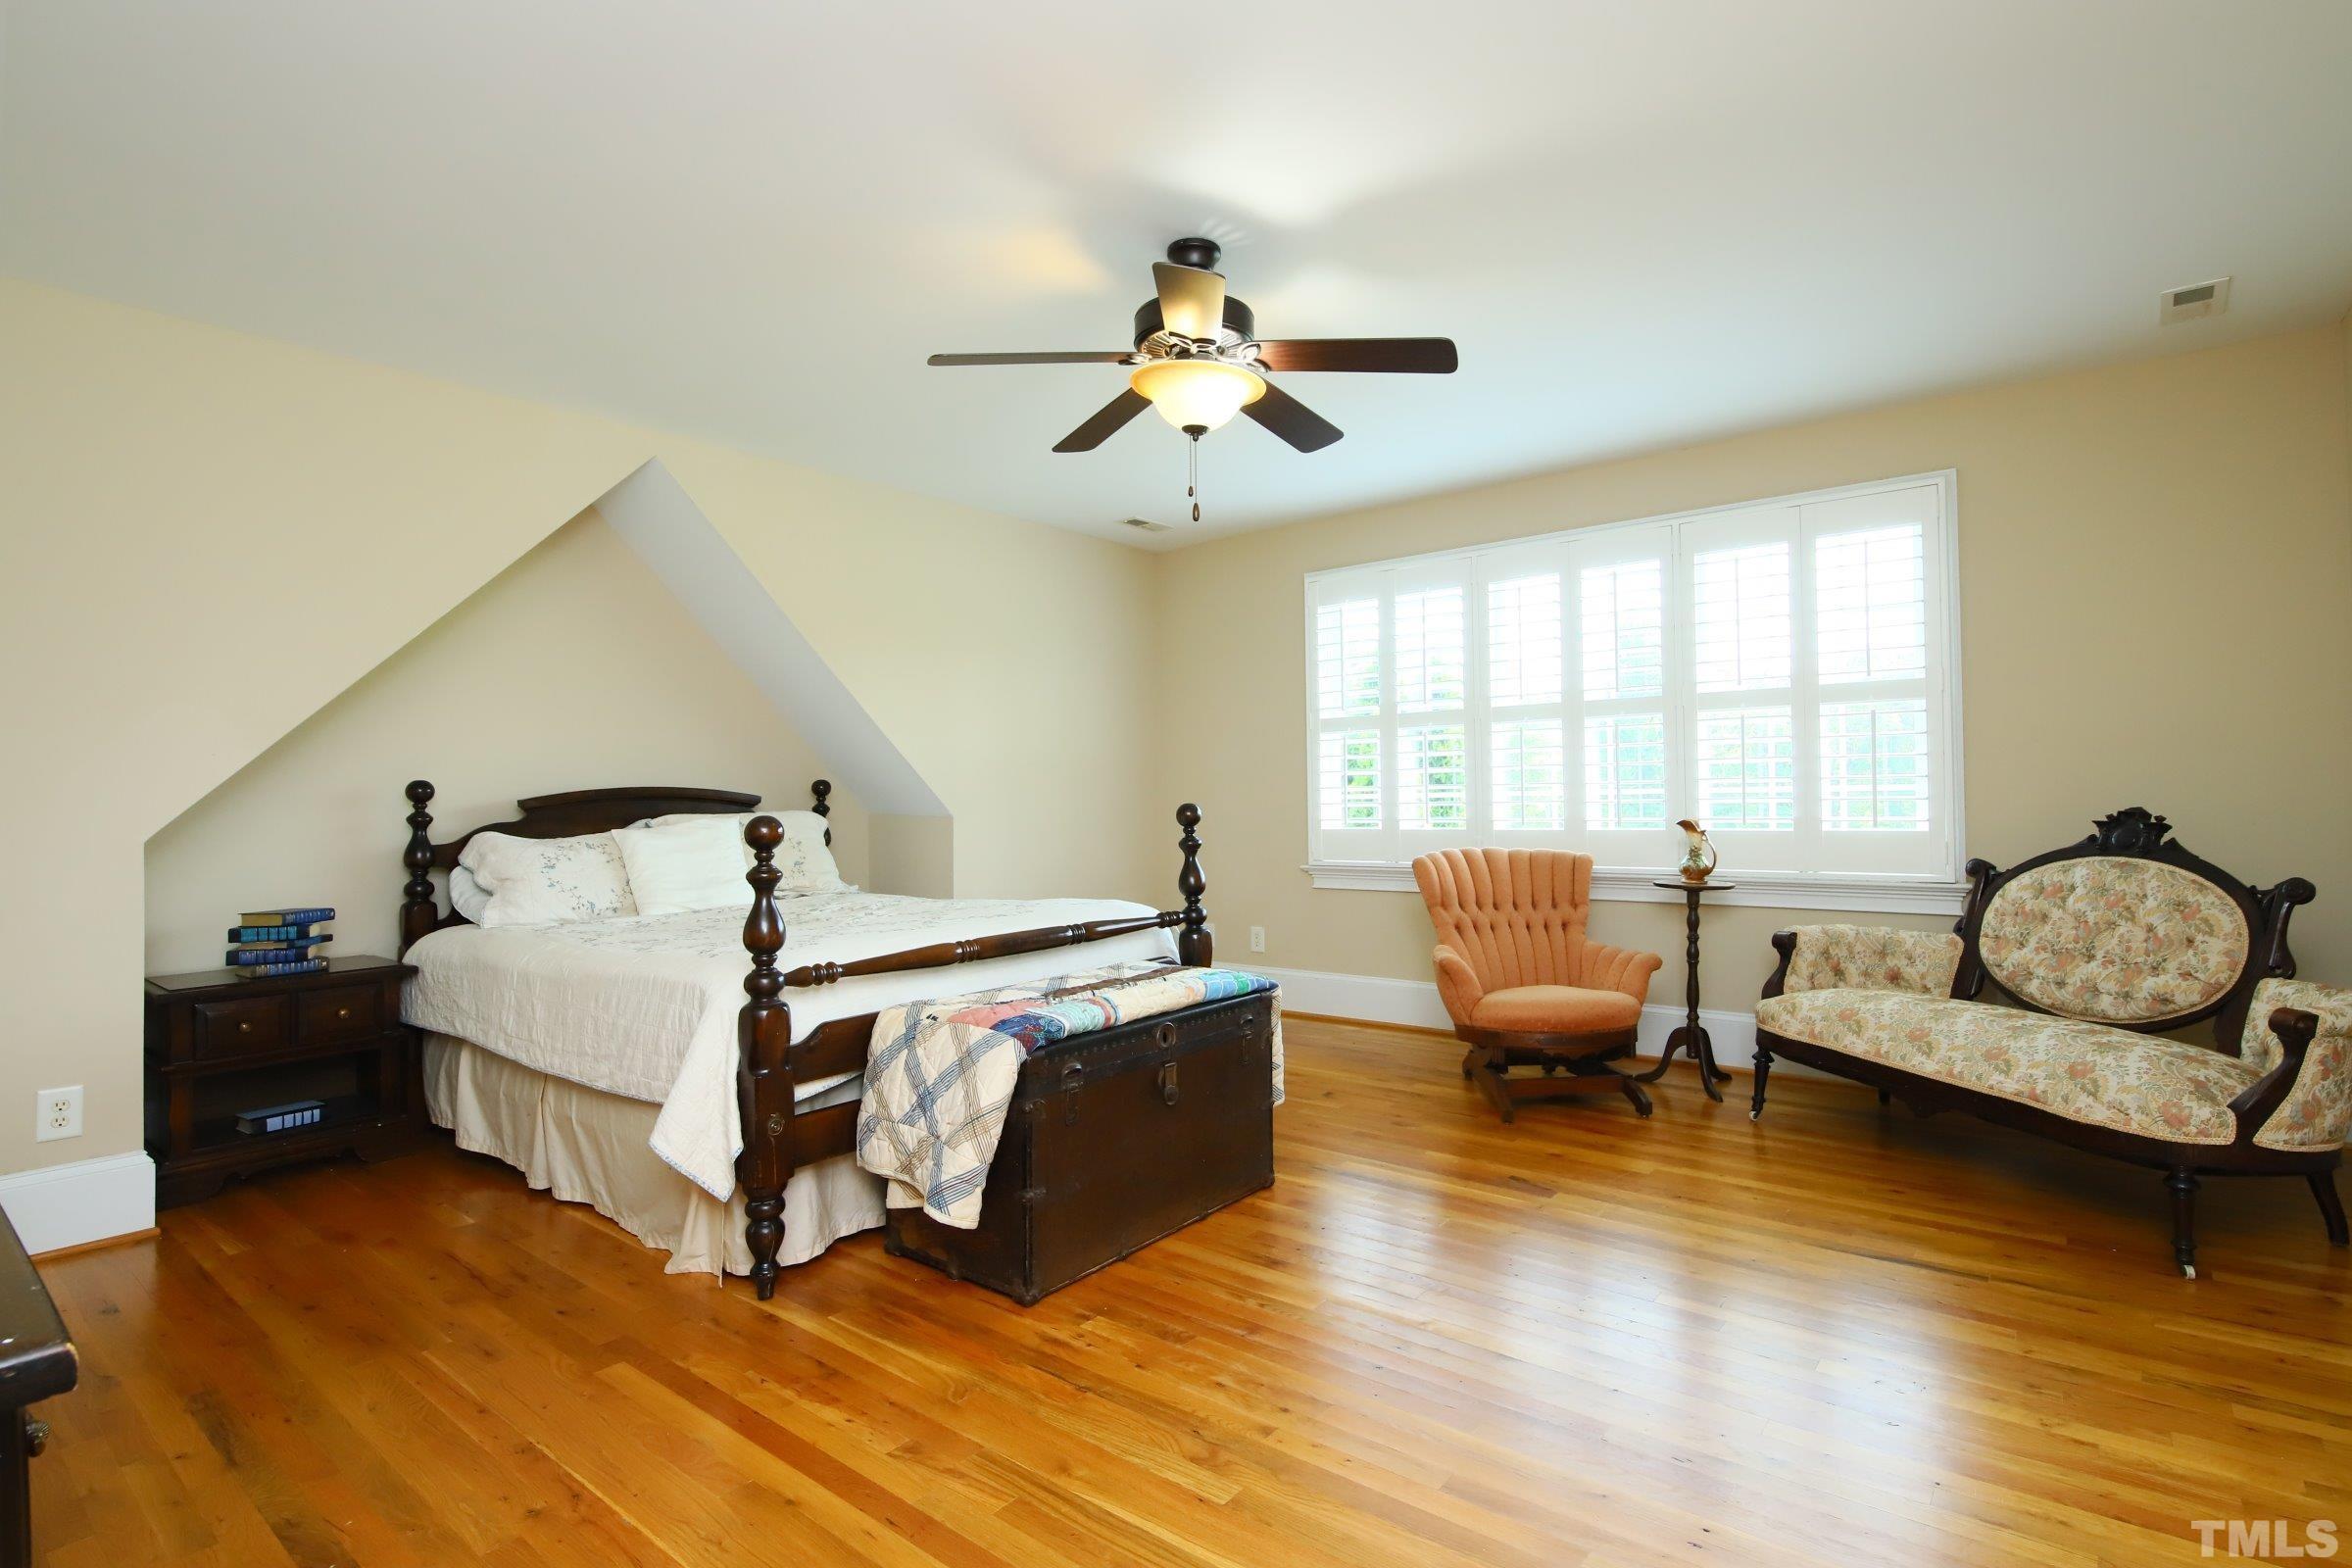 Beautiful room with cozy nook, large walk-in closet and attic storage access.